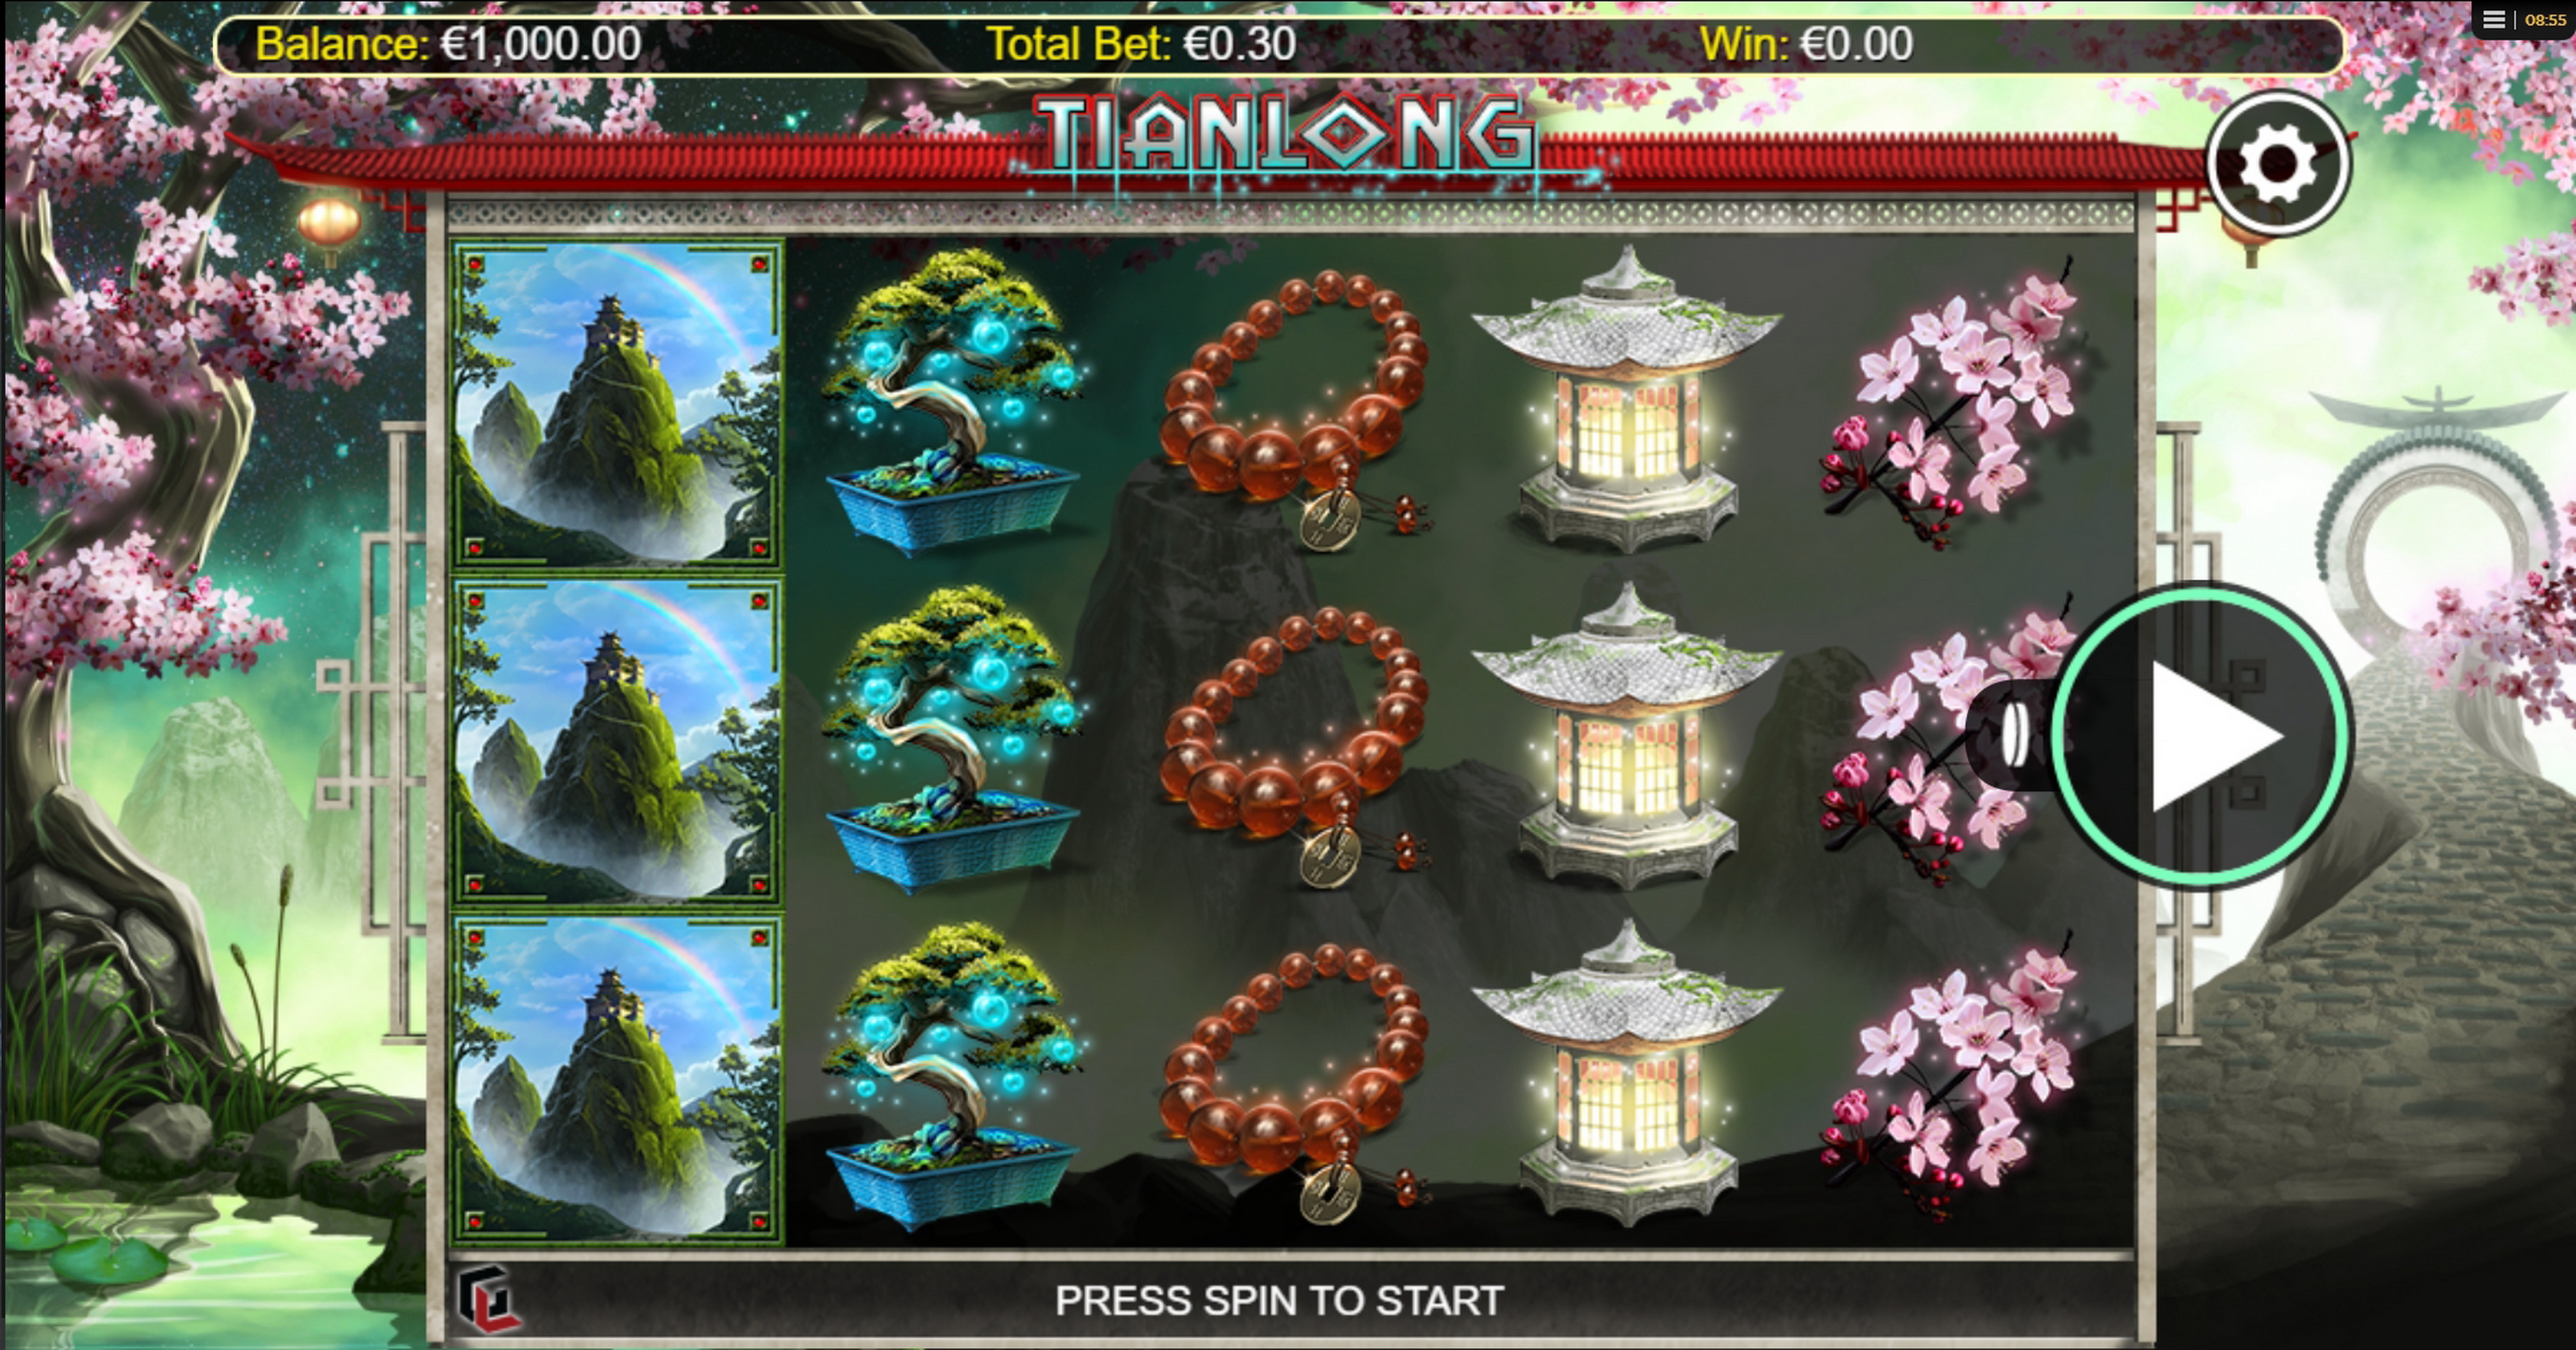 Reels in Tianlong Slot Game by Games Lab